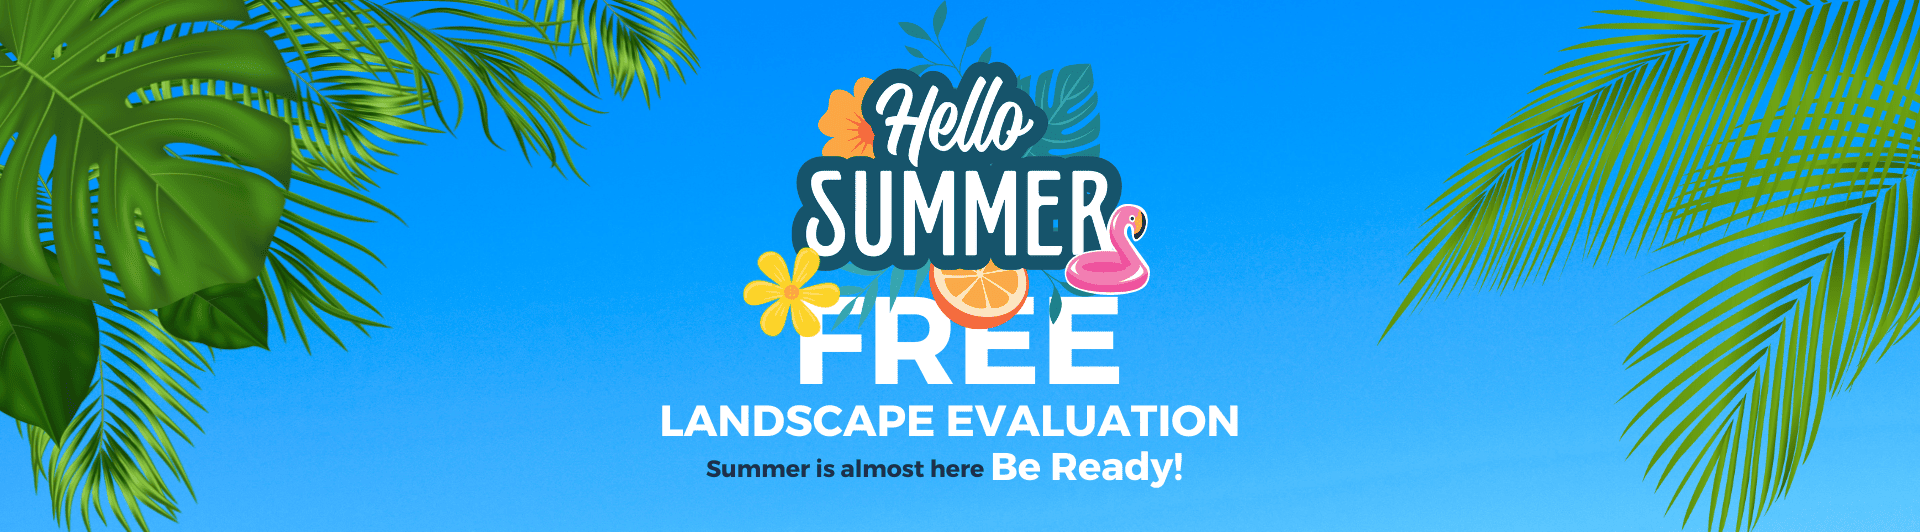 Hello Summer. Free Landscape Evaluation. Summer is almost here. Be ready!